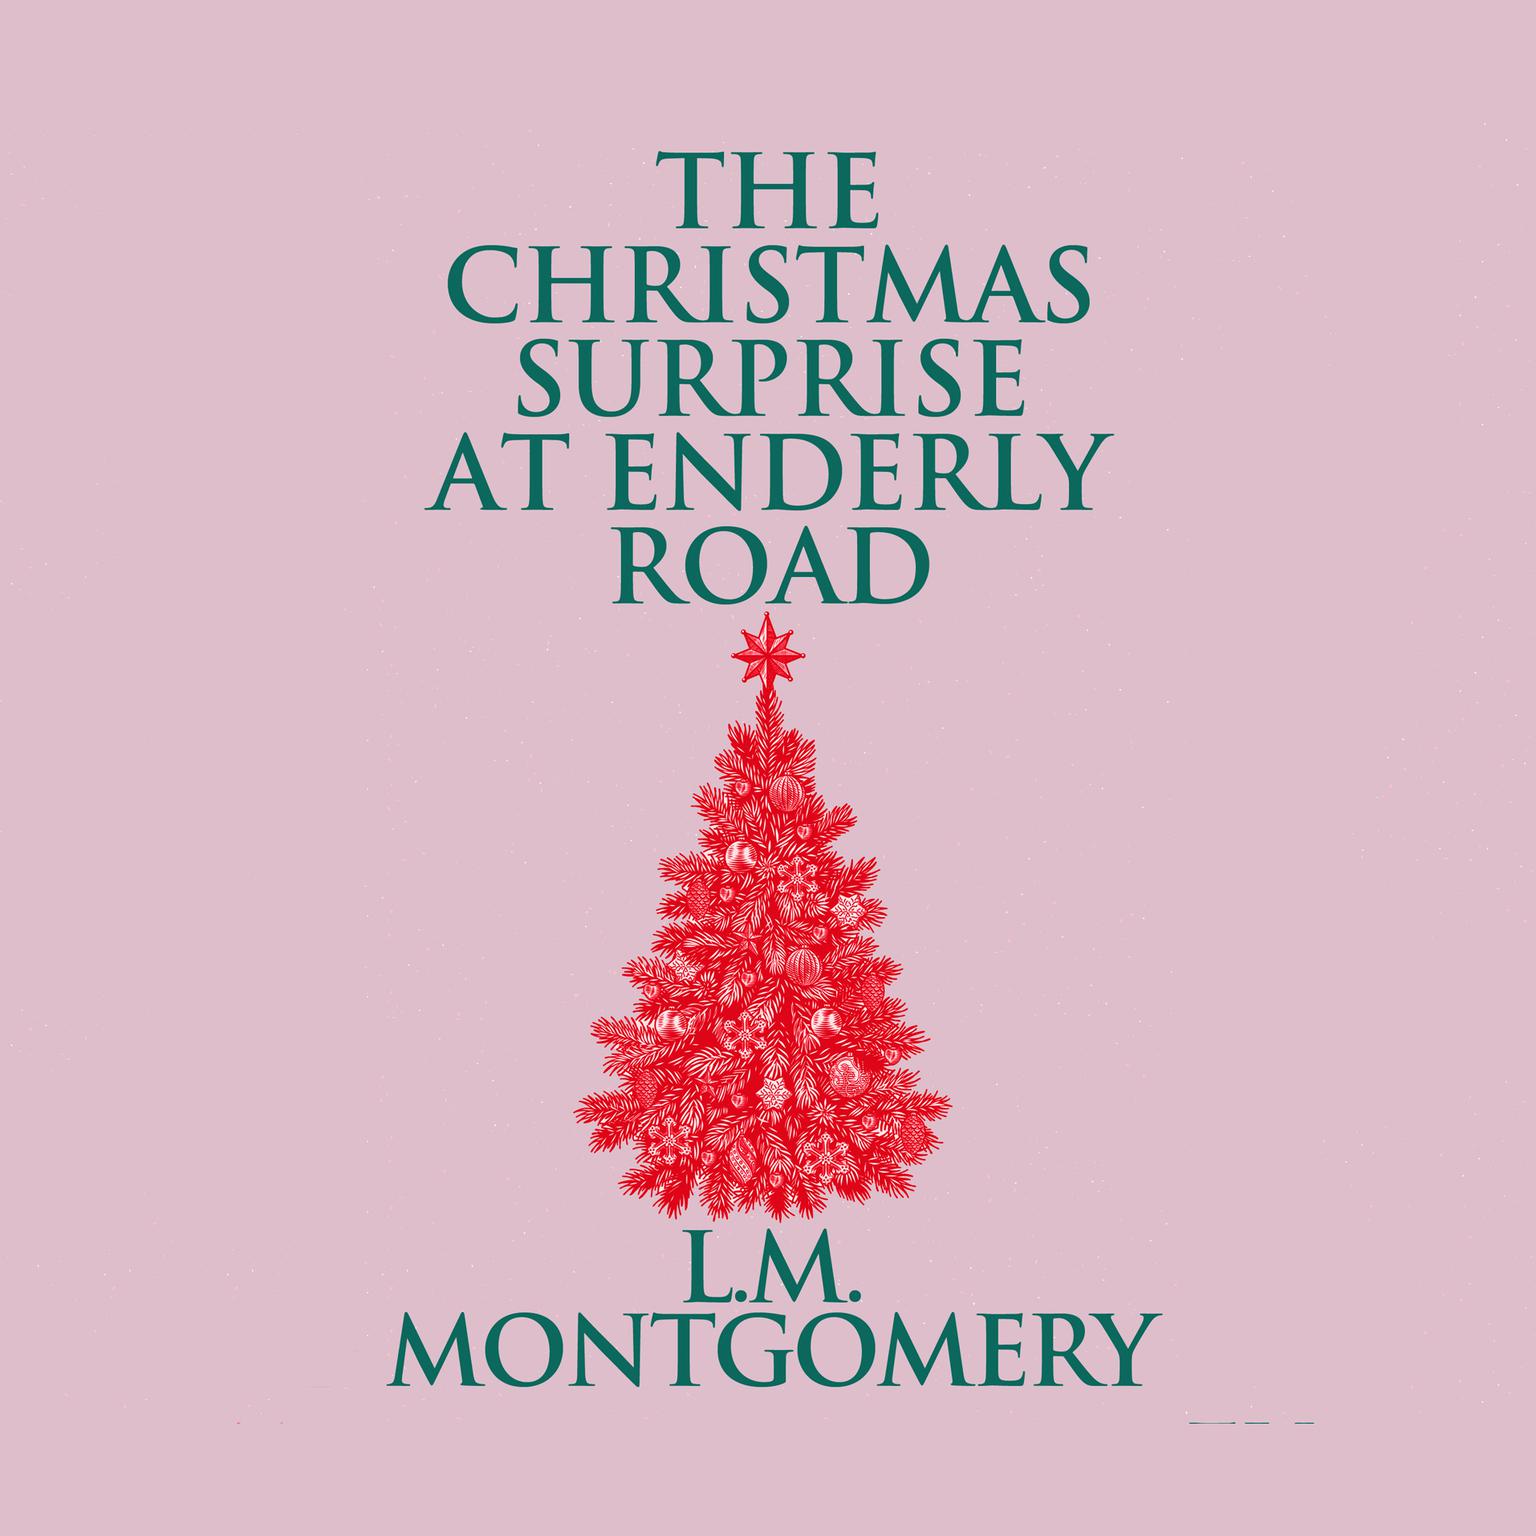 The Christmas Surprise at Enderly Road Audiobook, by L. M. Montgomery